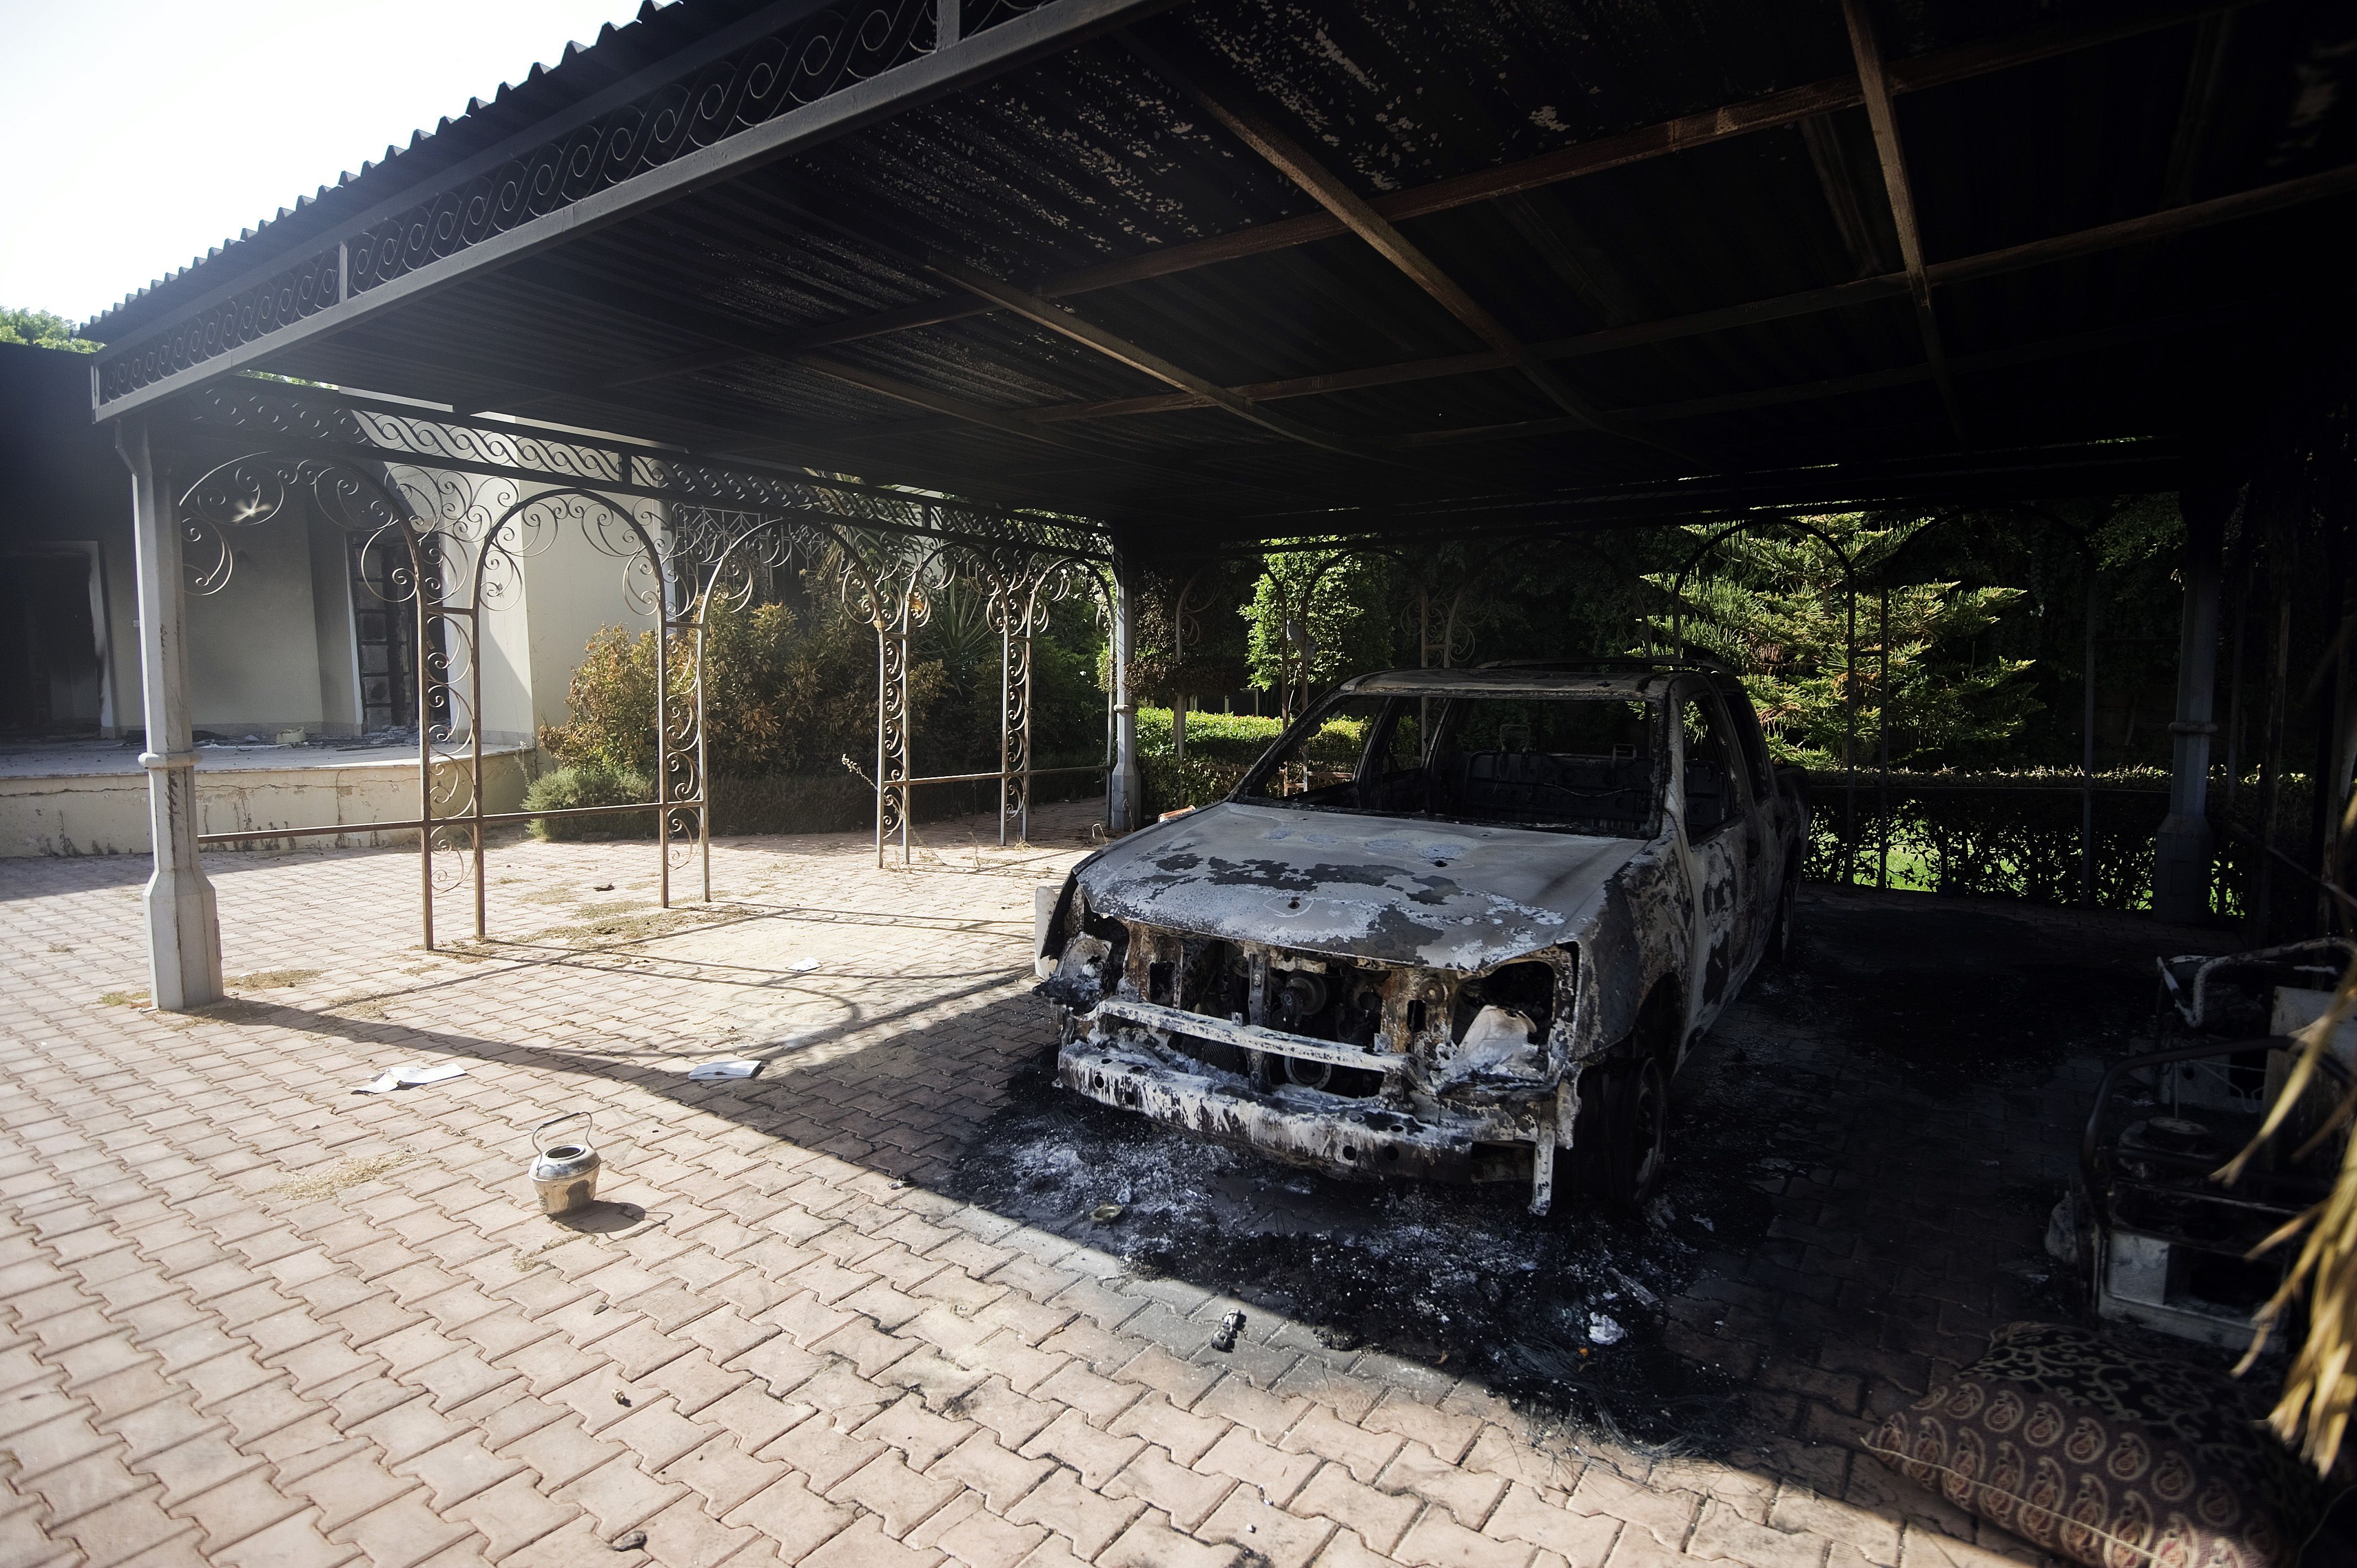 A picture shows a burnt vehicle inside the US consulate compound in Benghazi on September 13, 2012